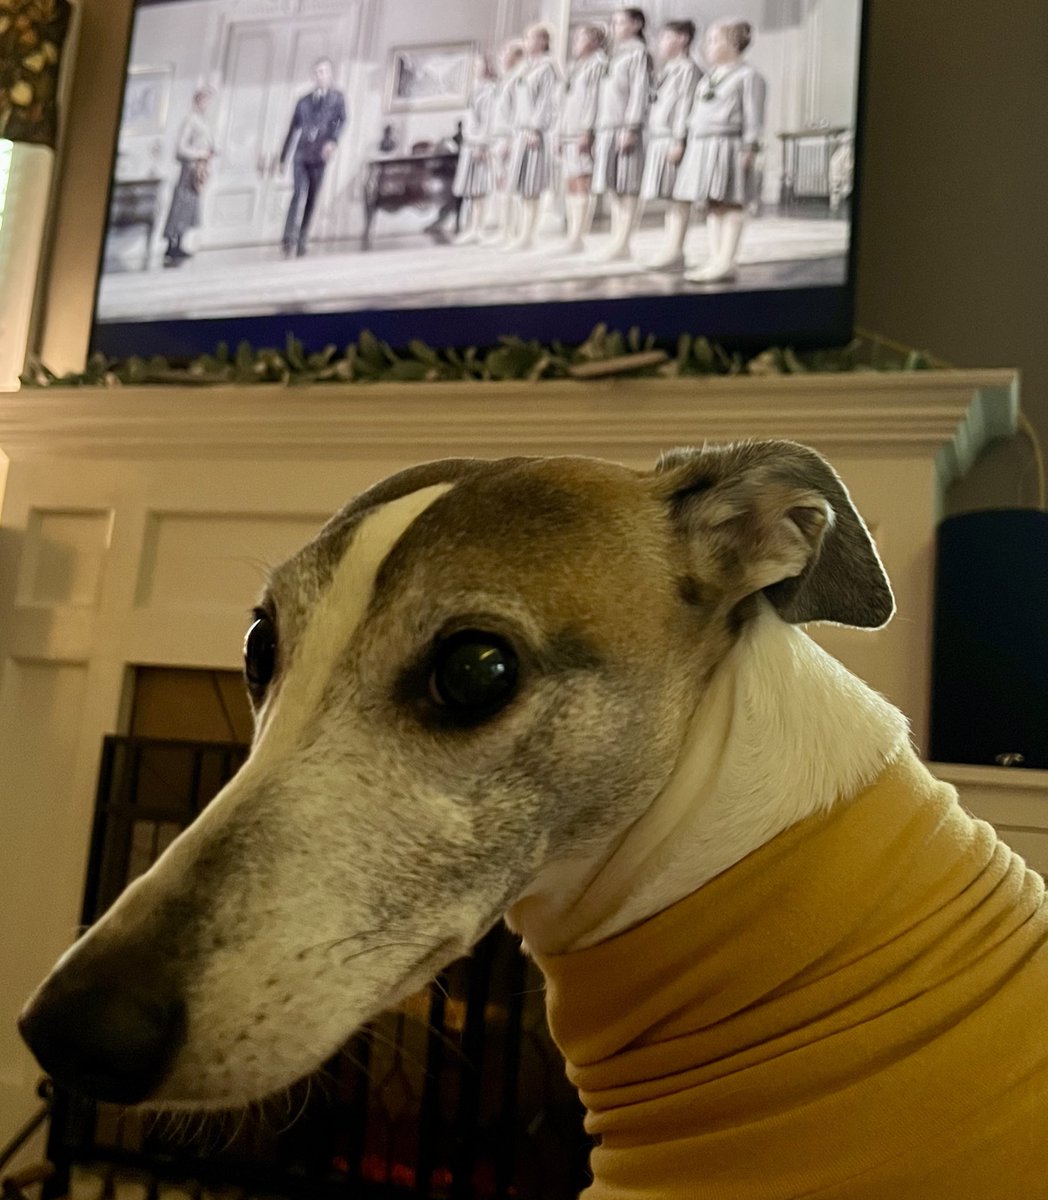 After yesterday’s “wearing of the curtains” silliness, I now have to watch the #SoundofMusic. 😂

I like the singing. The whistle I can do without. 🤷‍♀️
#whippet #sighthounds #dogs
#dogsofx #adogslife